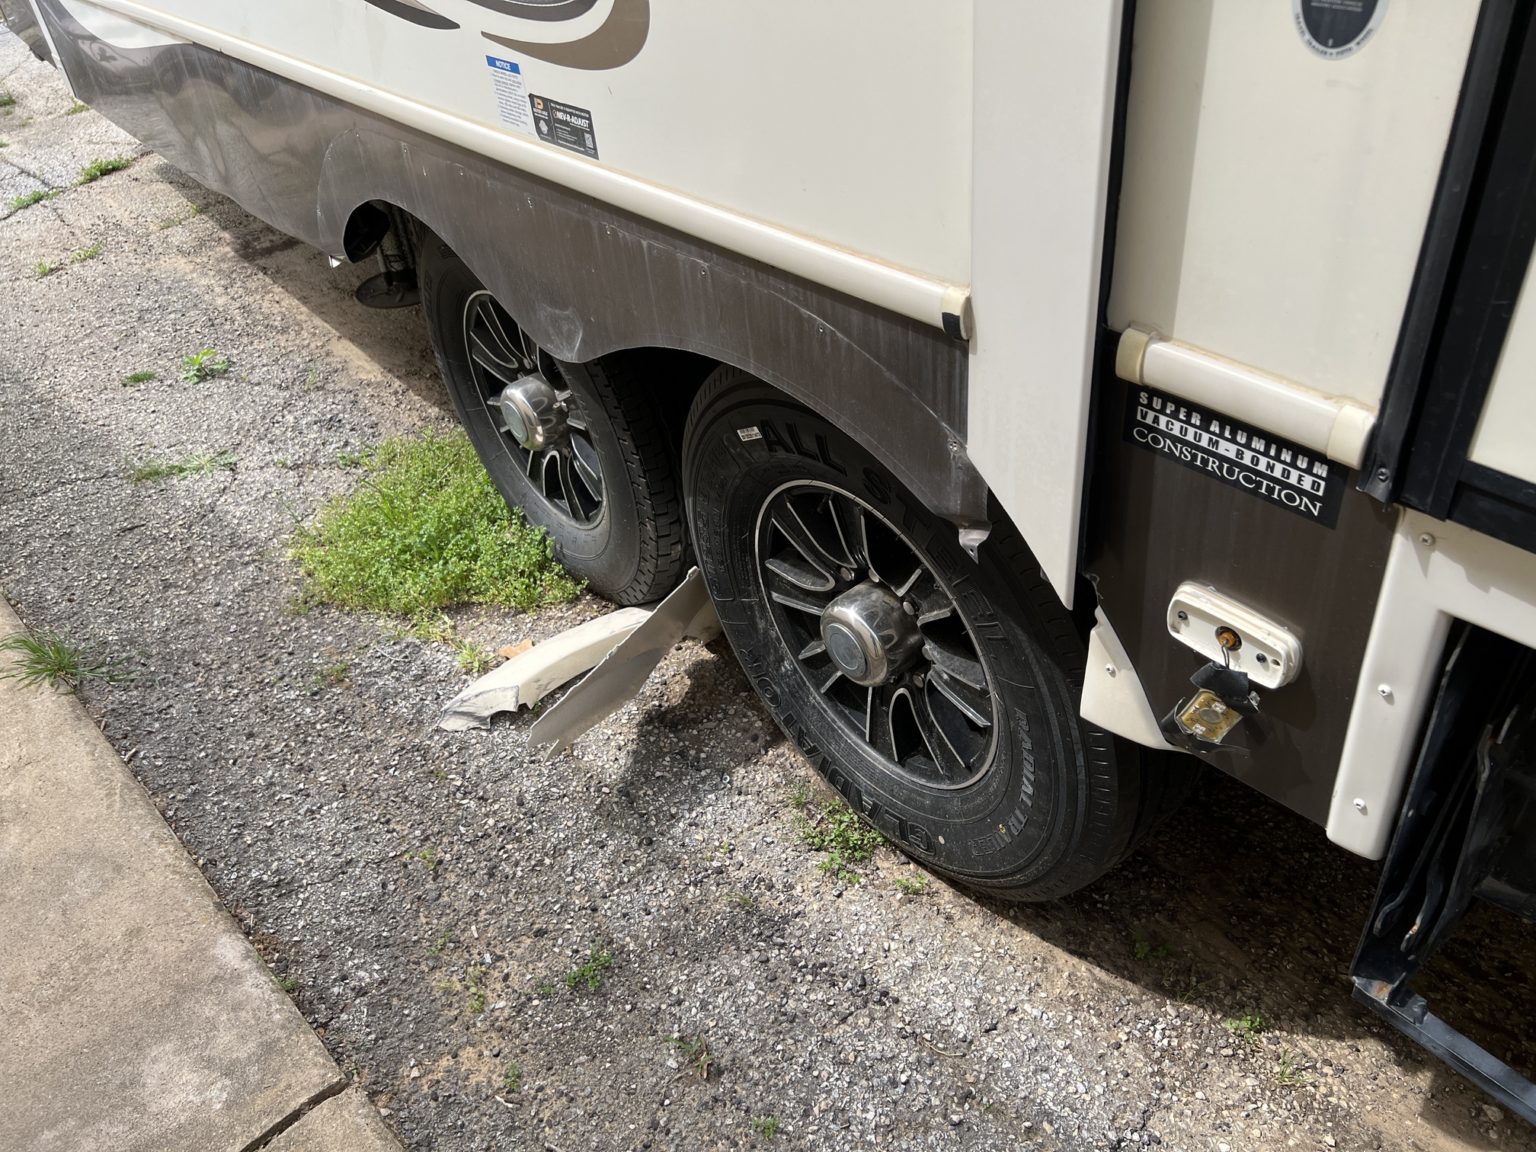 rv with damage from a tire blowout